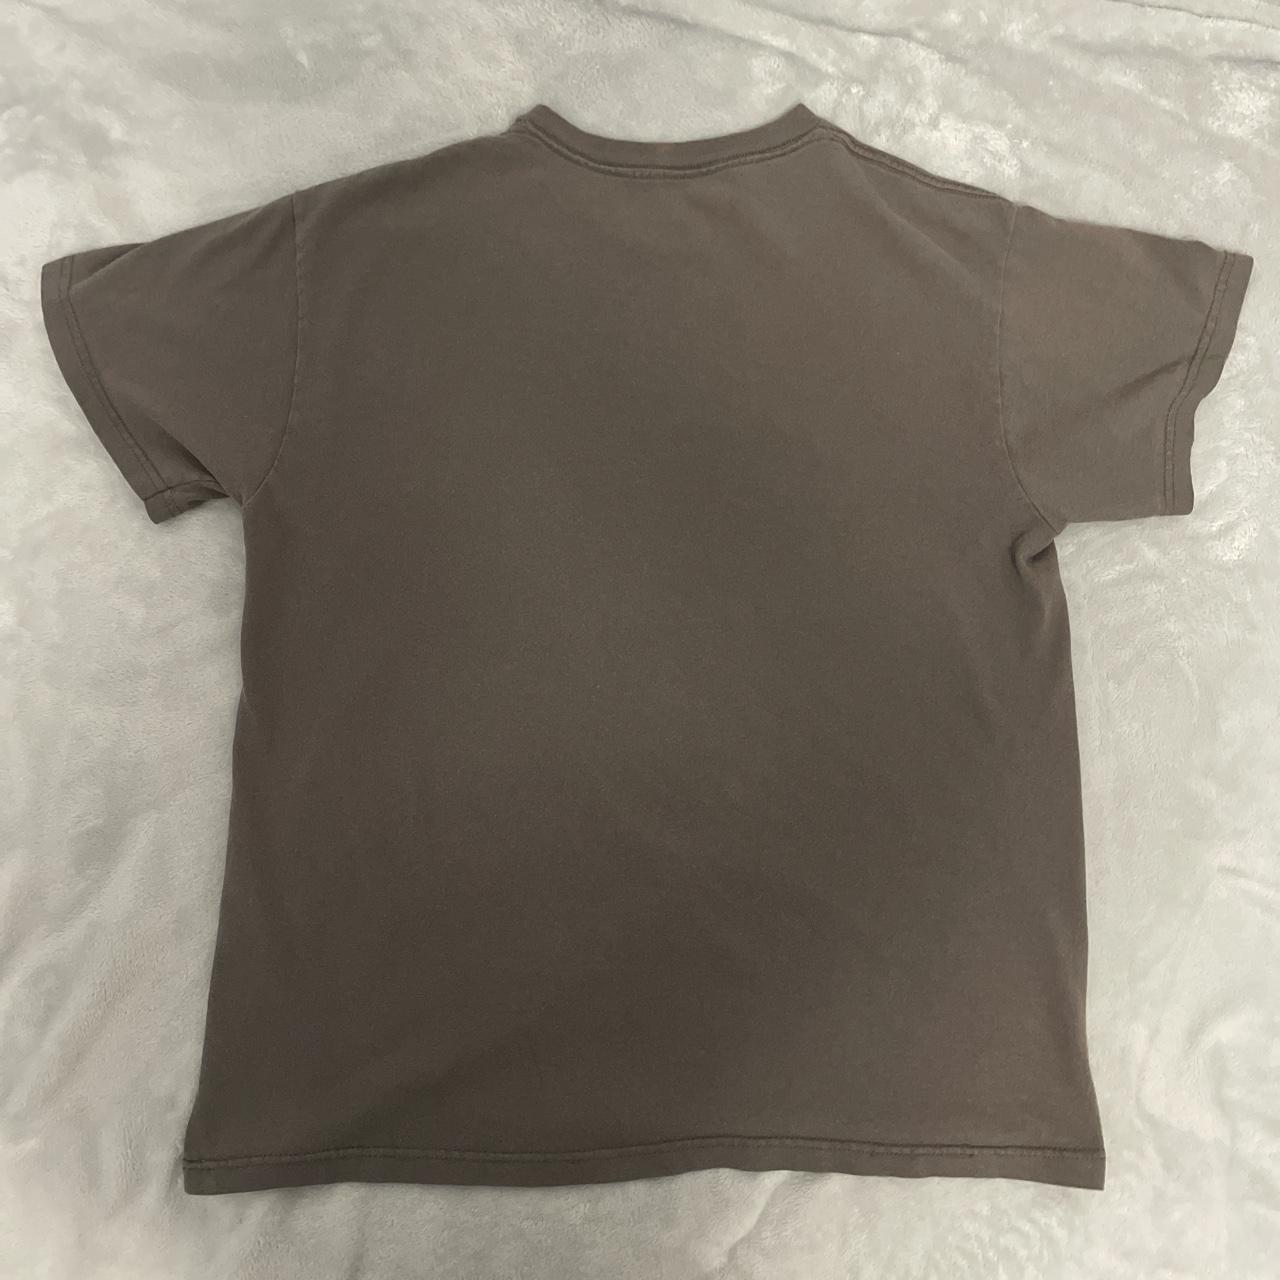 Carbon Men's Grey and Brown T-shirt (3)